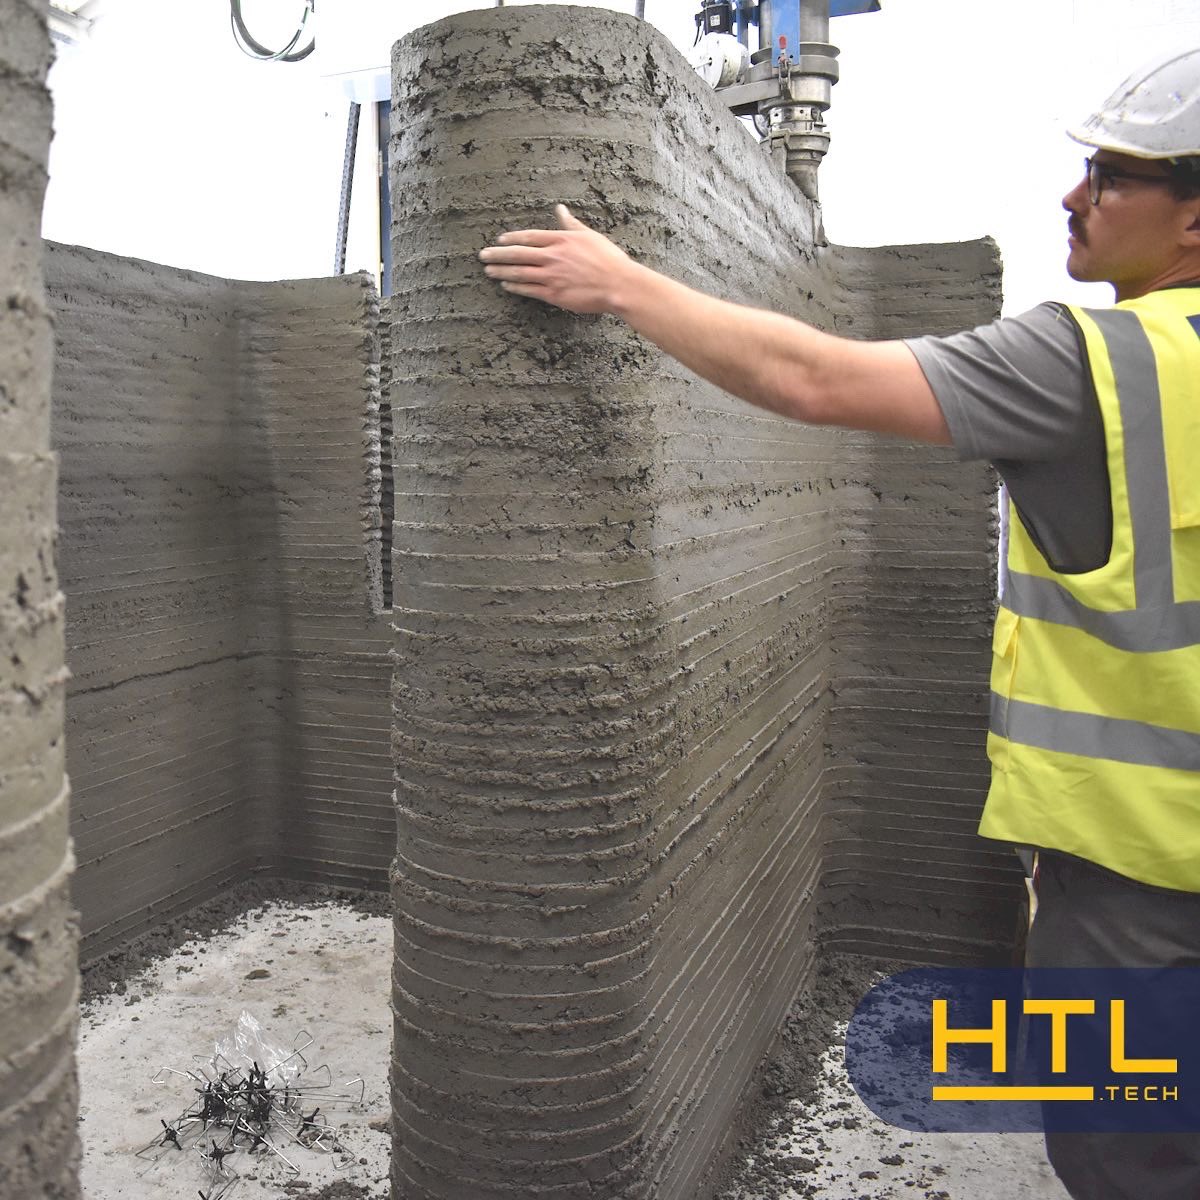 For the love of curves. 

#HTL #construction #technology #3dconstruction #3dprinting #buildingautomation #innovation #COBOD #3dbuilding #3dconstructionprinting #sustainability #testing #3dcp #3dhousebuilding #additivemanufacturing #concrete #advancedmanufacturing #innovation